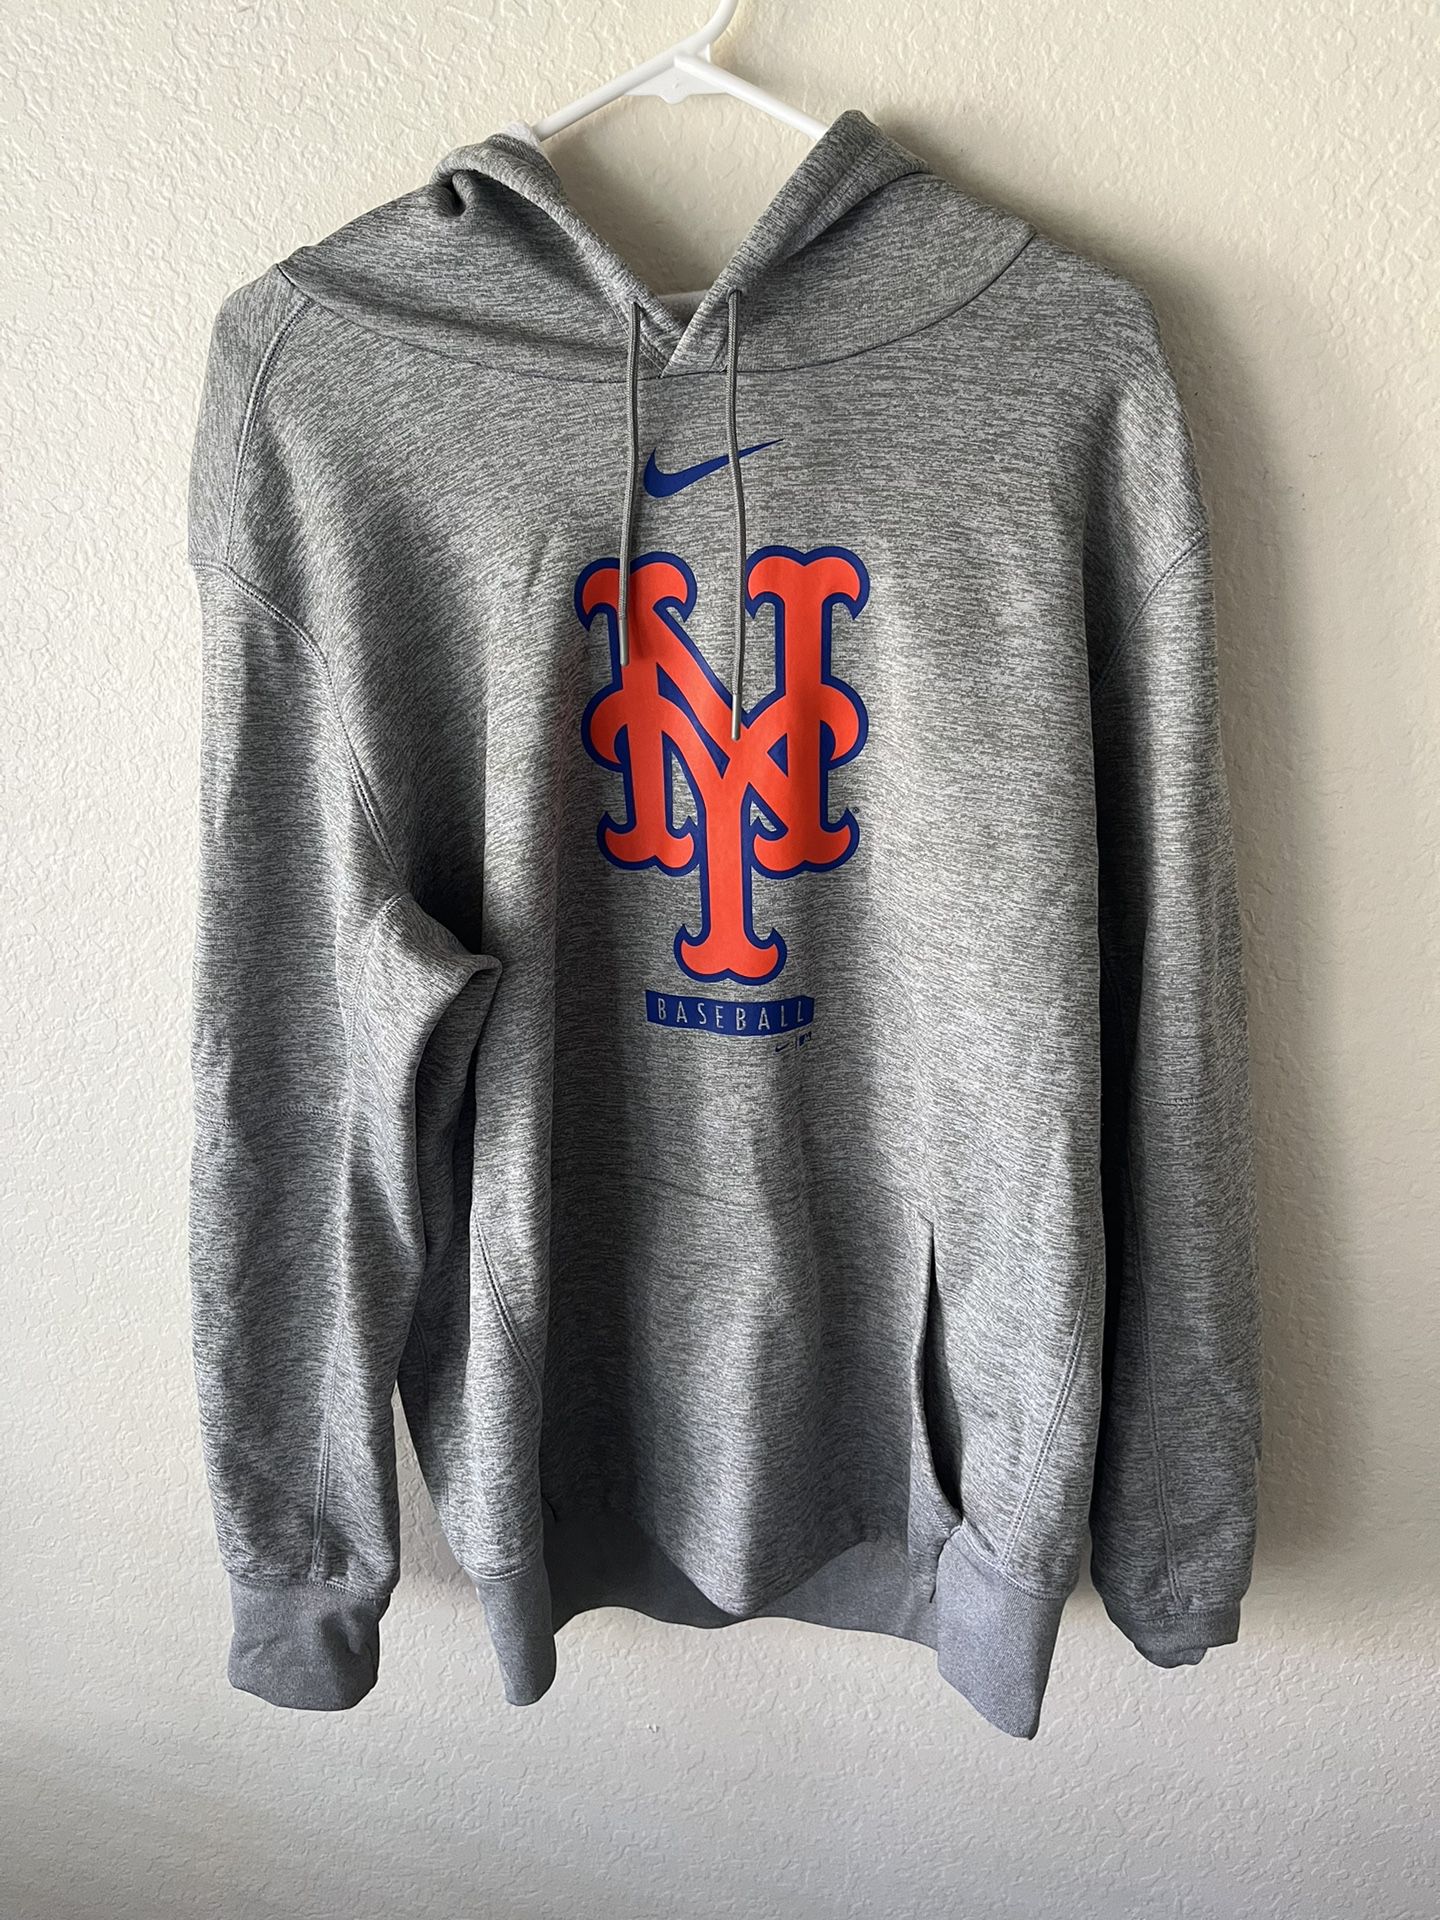 New York Mets Nike Dri Fit Grey Pullover Hoodie Men's Size L for